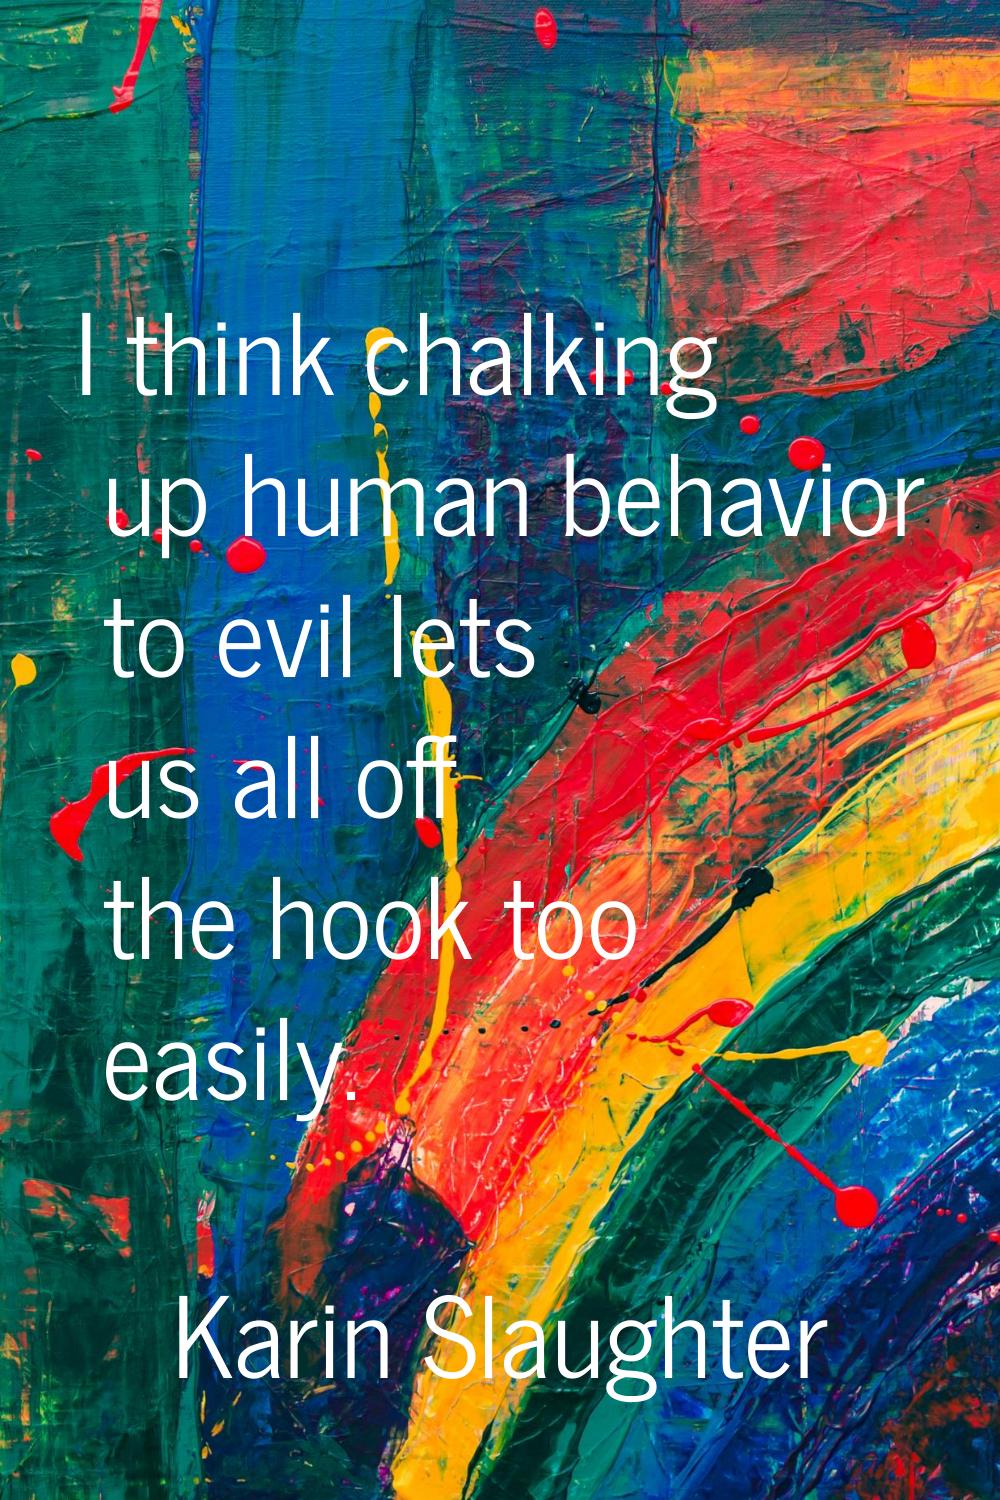 I think chalking up human behavior to evil lets us all off the hook too easily.